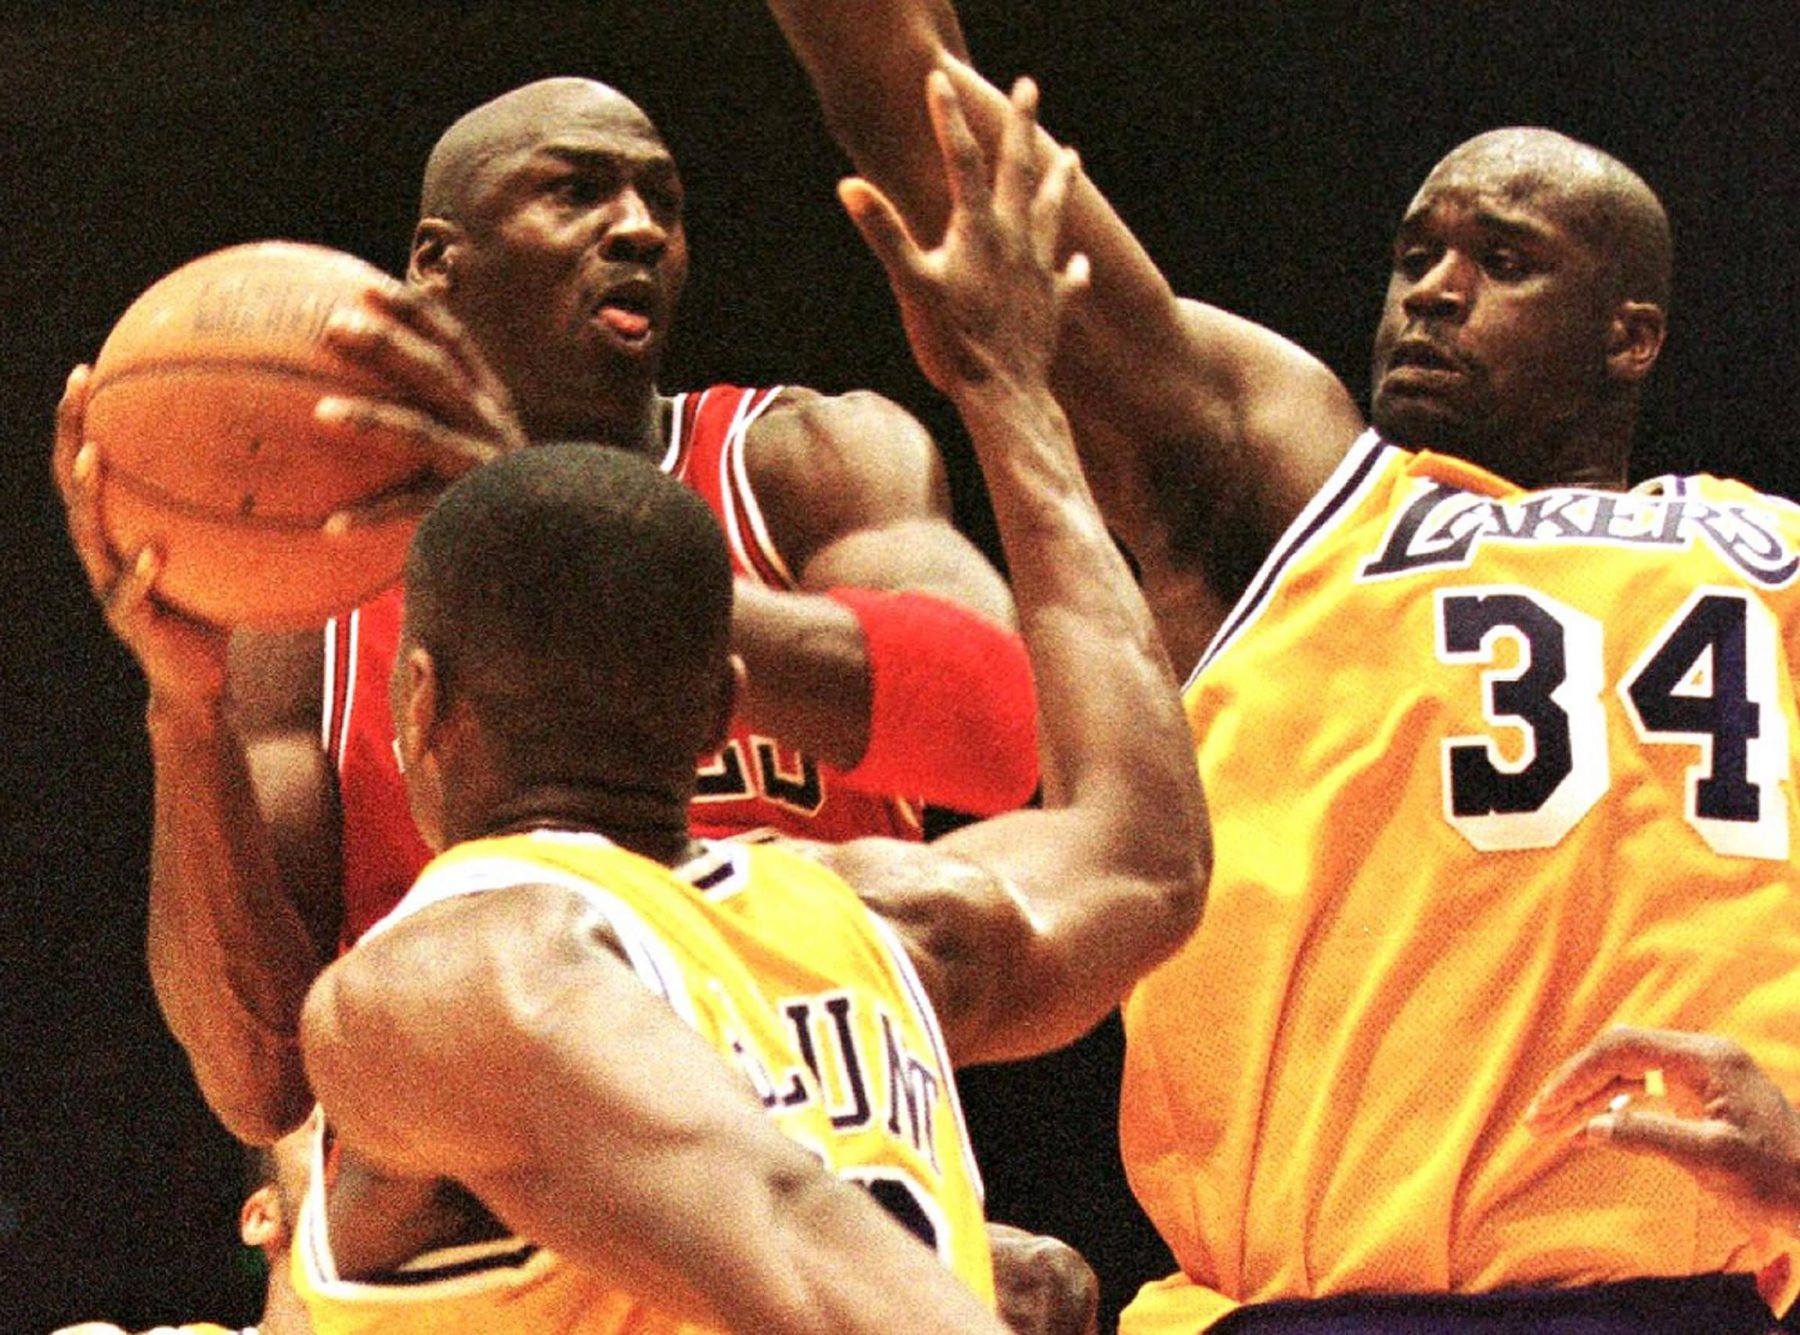 Shaquille O'Neal and Michael Jordan